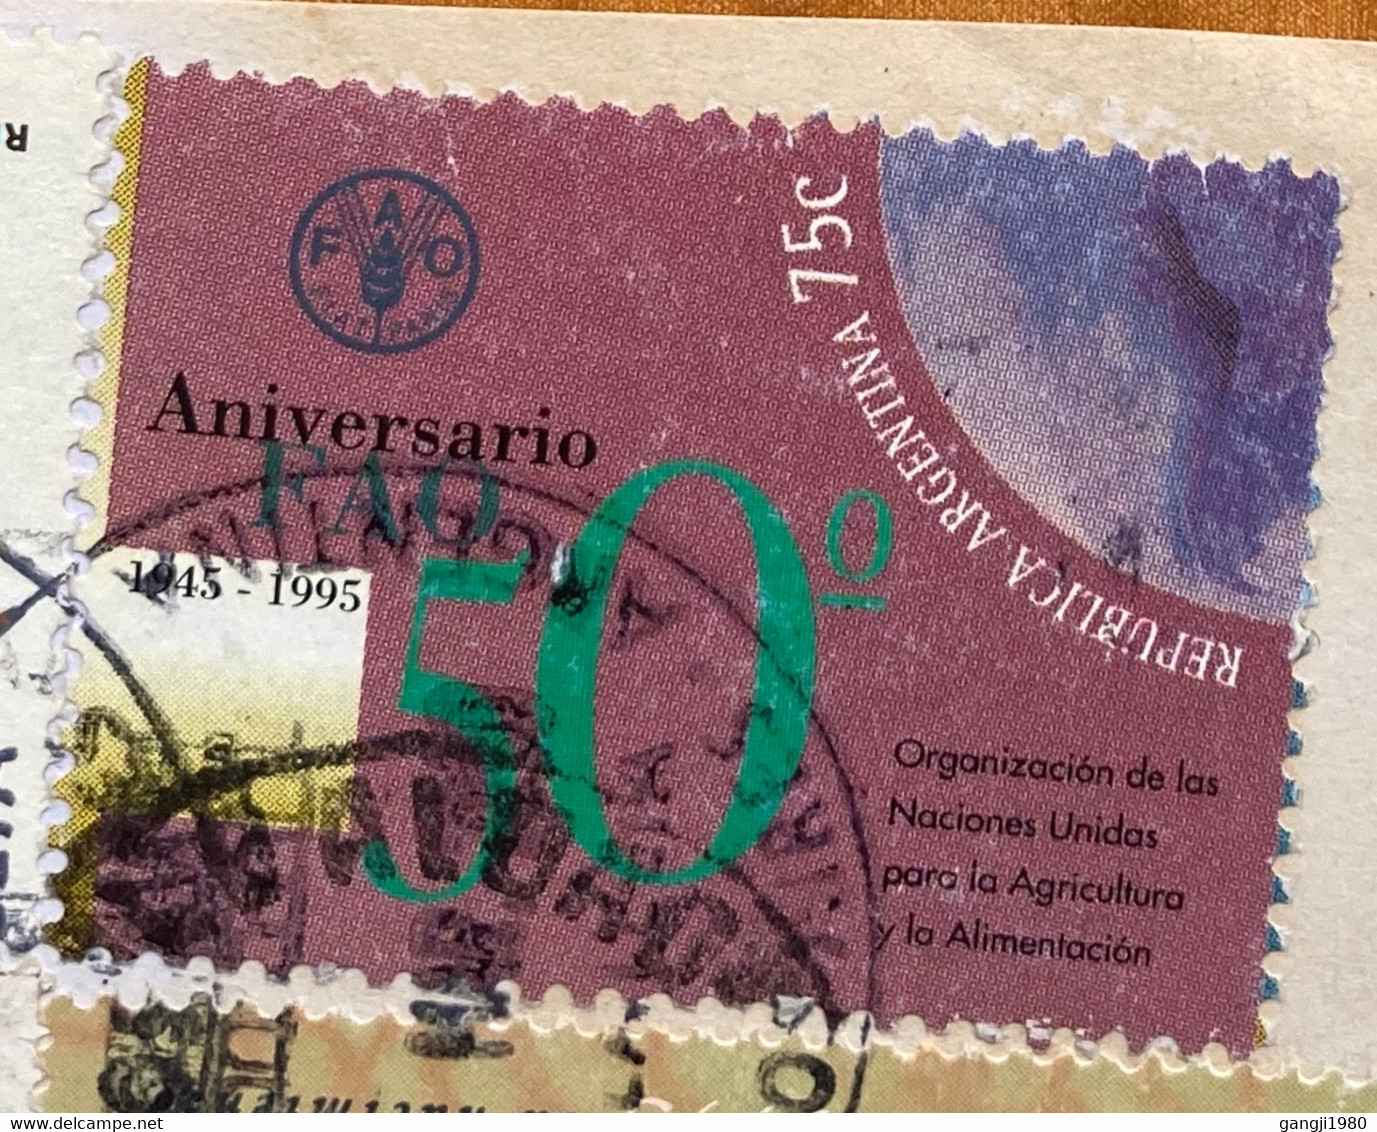 ARGENTINA 2000, JUAN PERON, OWL BIRD TAB, 3 STAMPS SPECIAL BUILDING CANCELLATION,AIRMAIL COVER TO INDIA, RECEIVED IN TOR - Cartas & Documentos